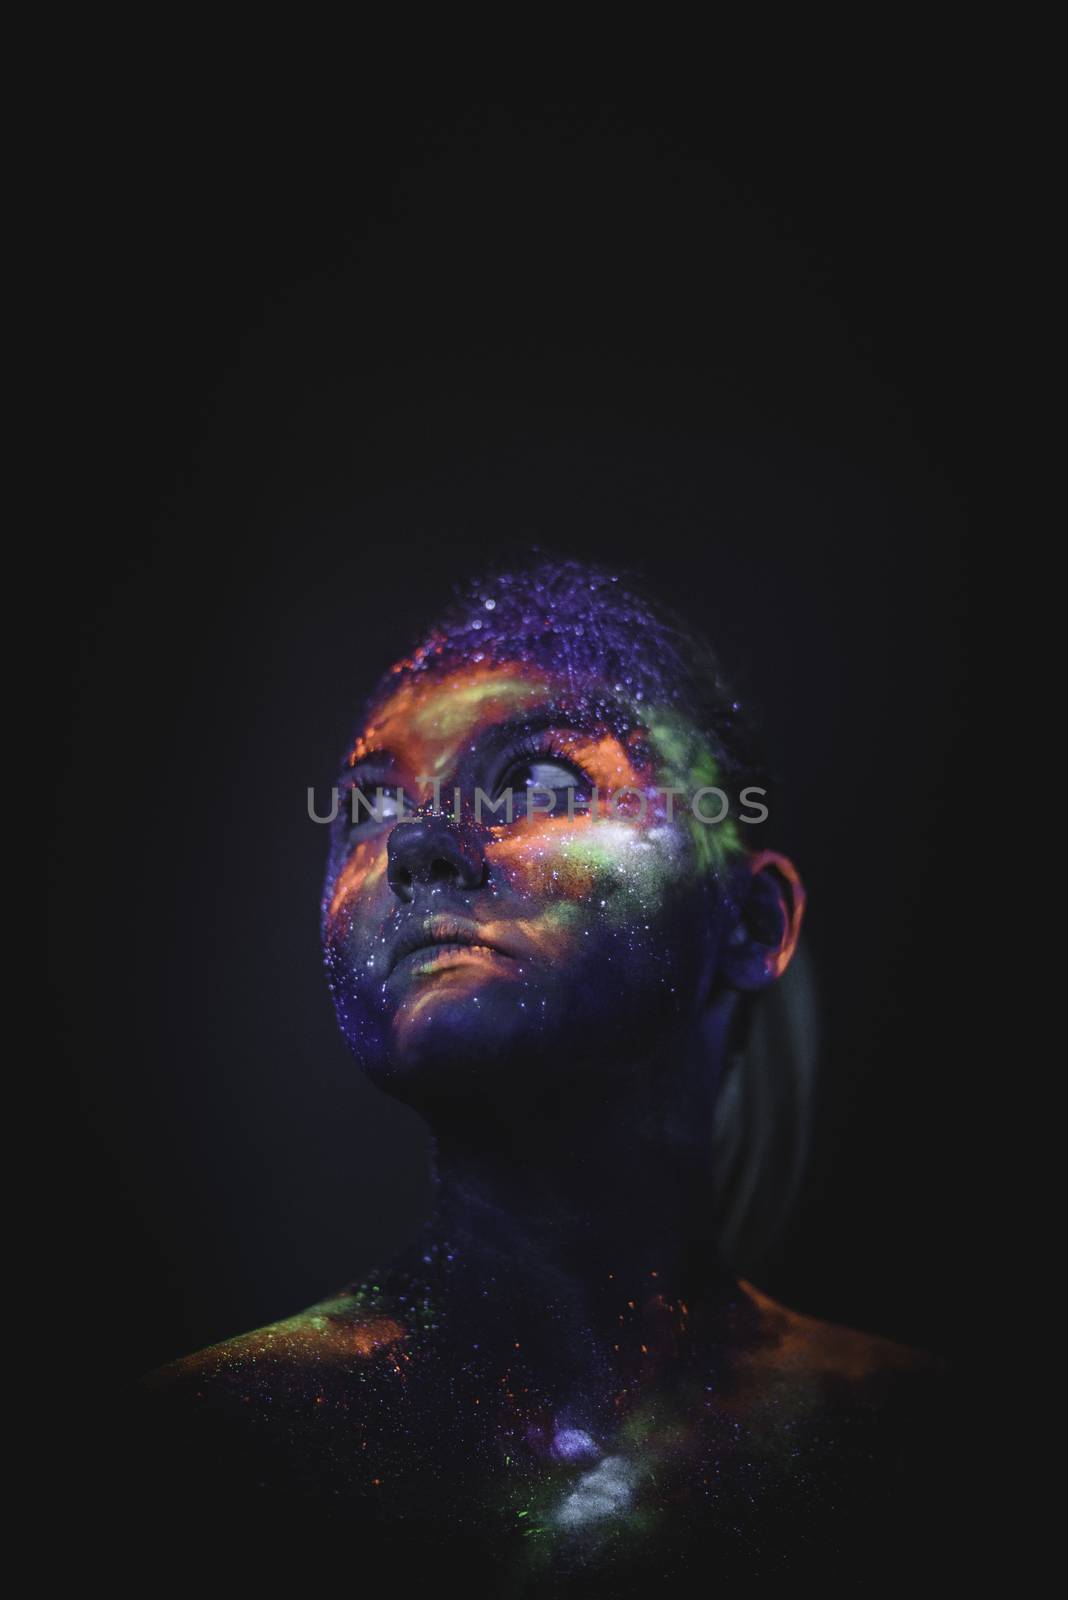 Conceptual shot of light and shine fluorescent colors young girl's face